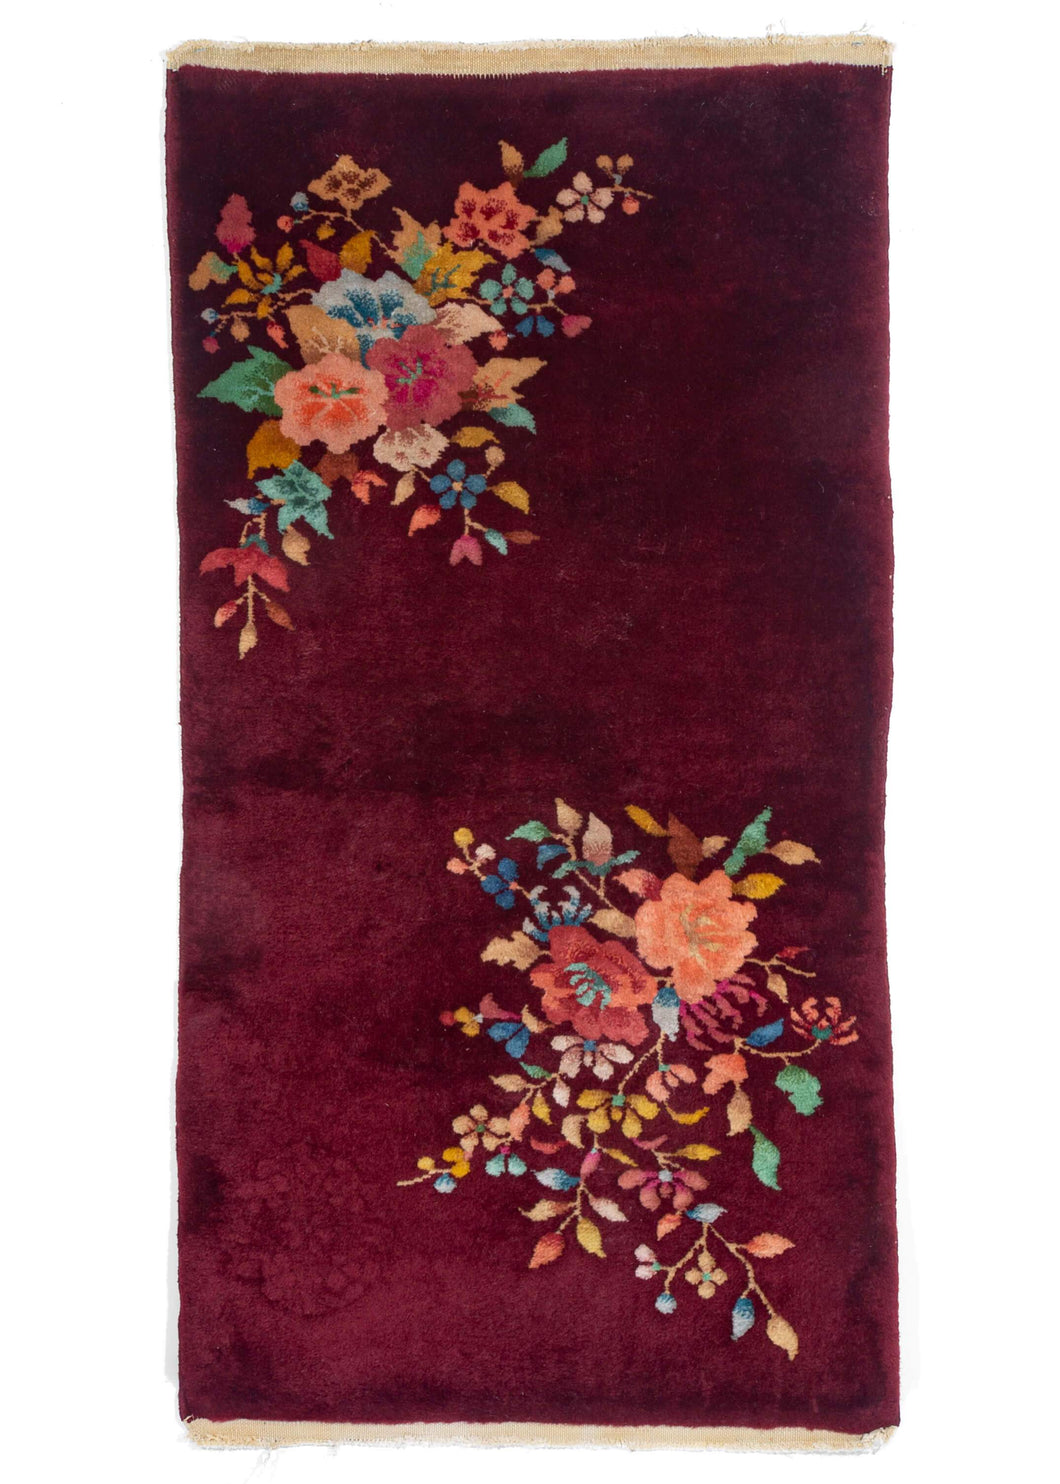 Chinese Art Deco Rug Handwoven Maroon with full medium thick pile and arranged flowers